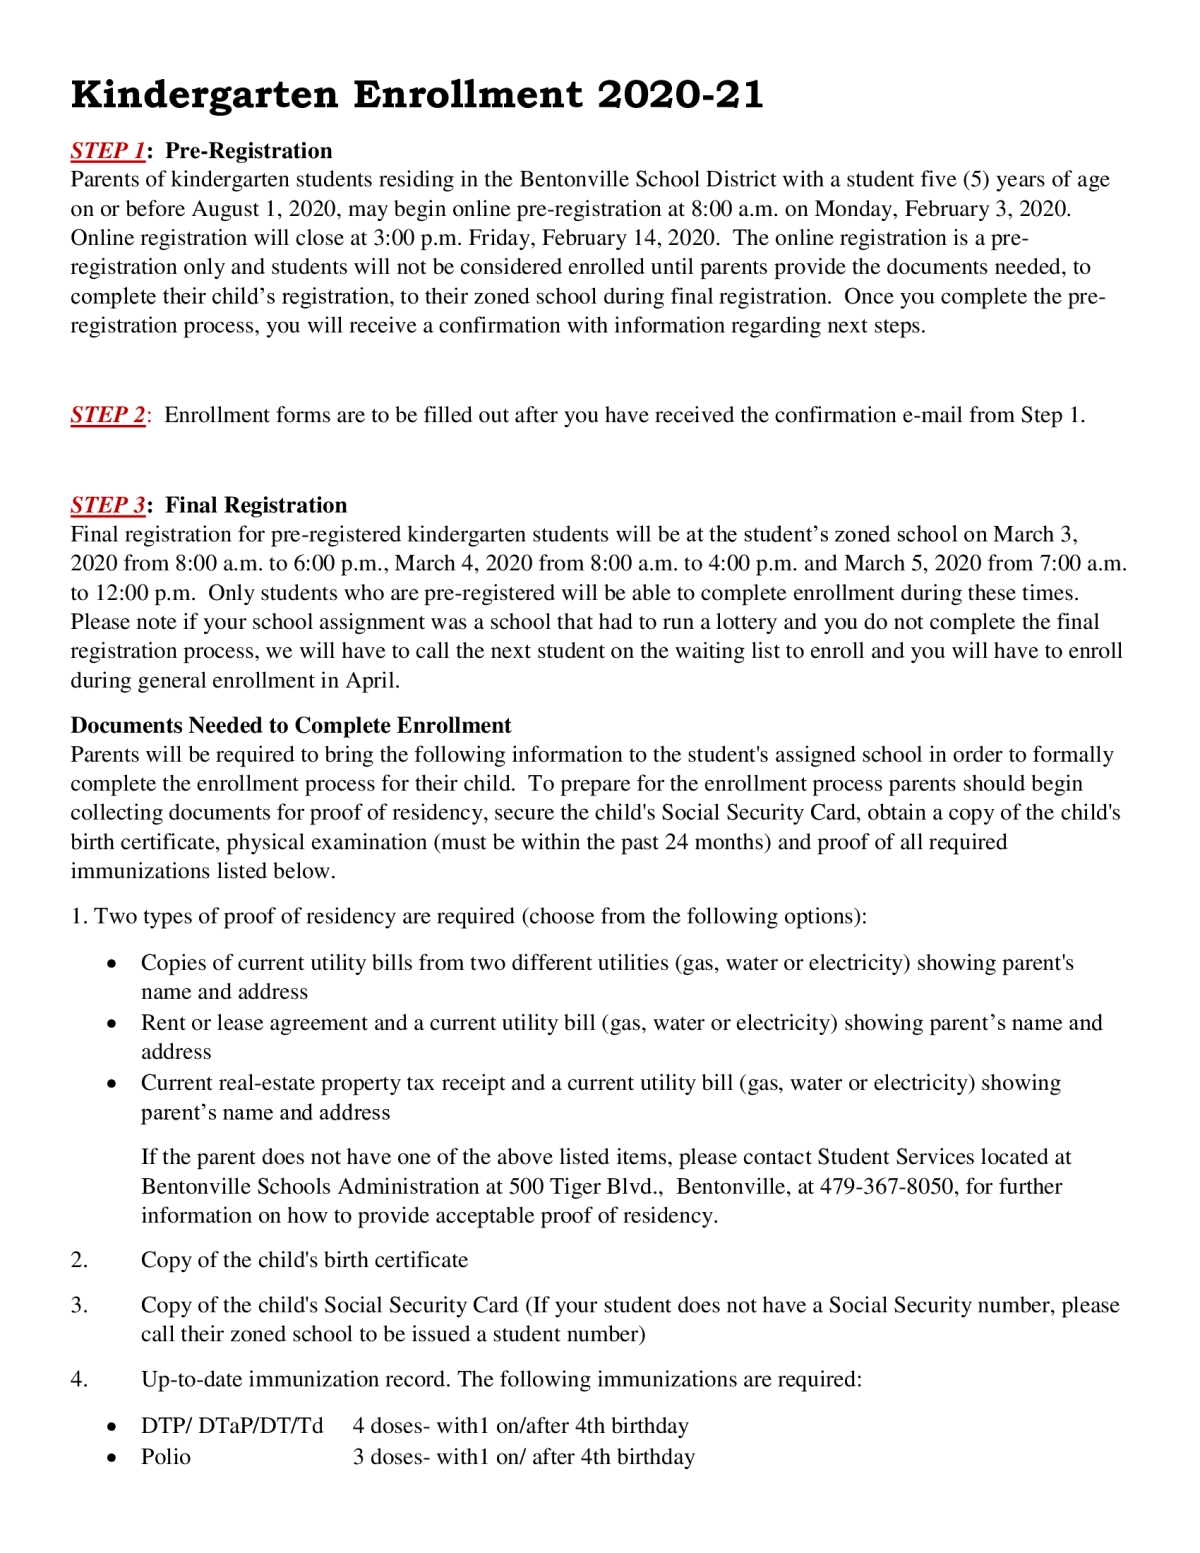 Parenting Agreement Templates 8 Free Pdf Documents